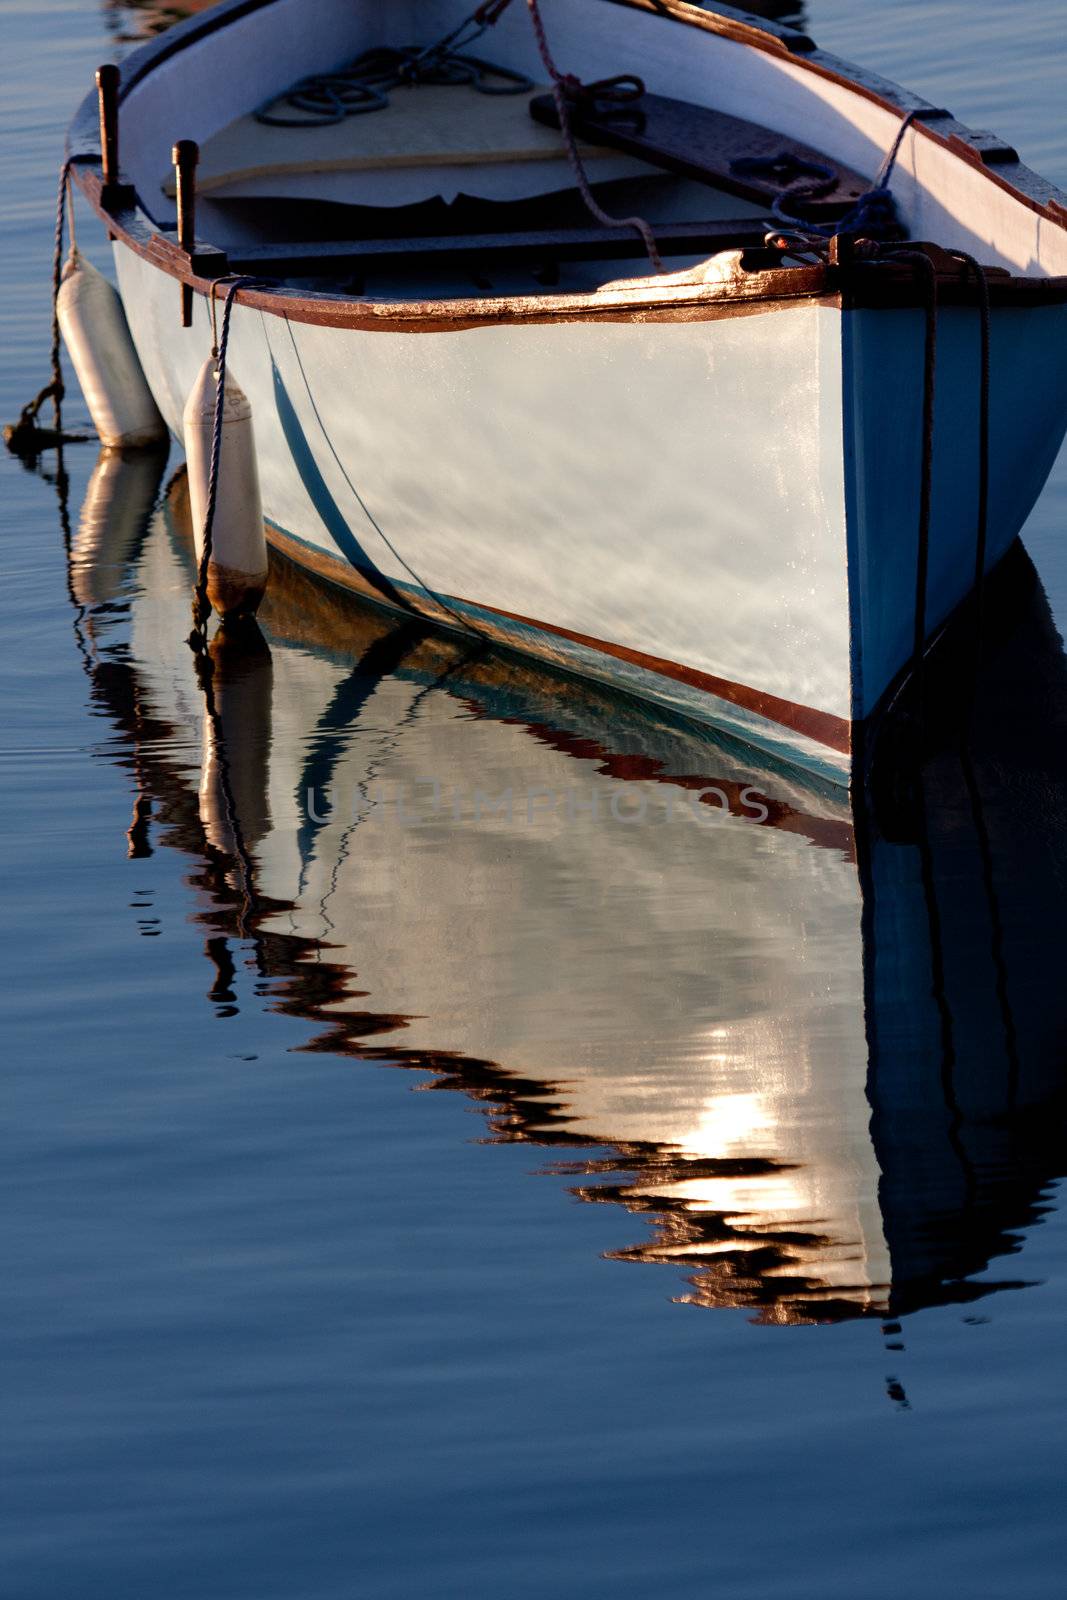 Morning light on a grey boat  by allg